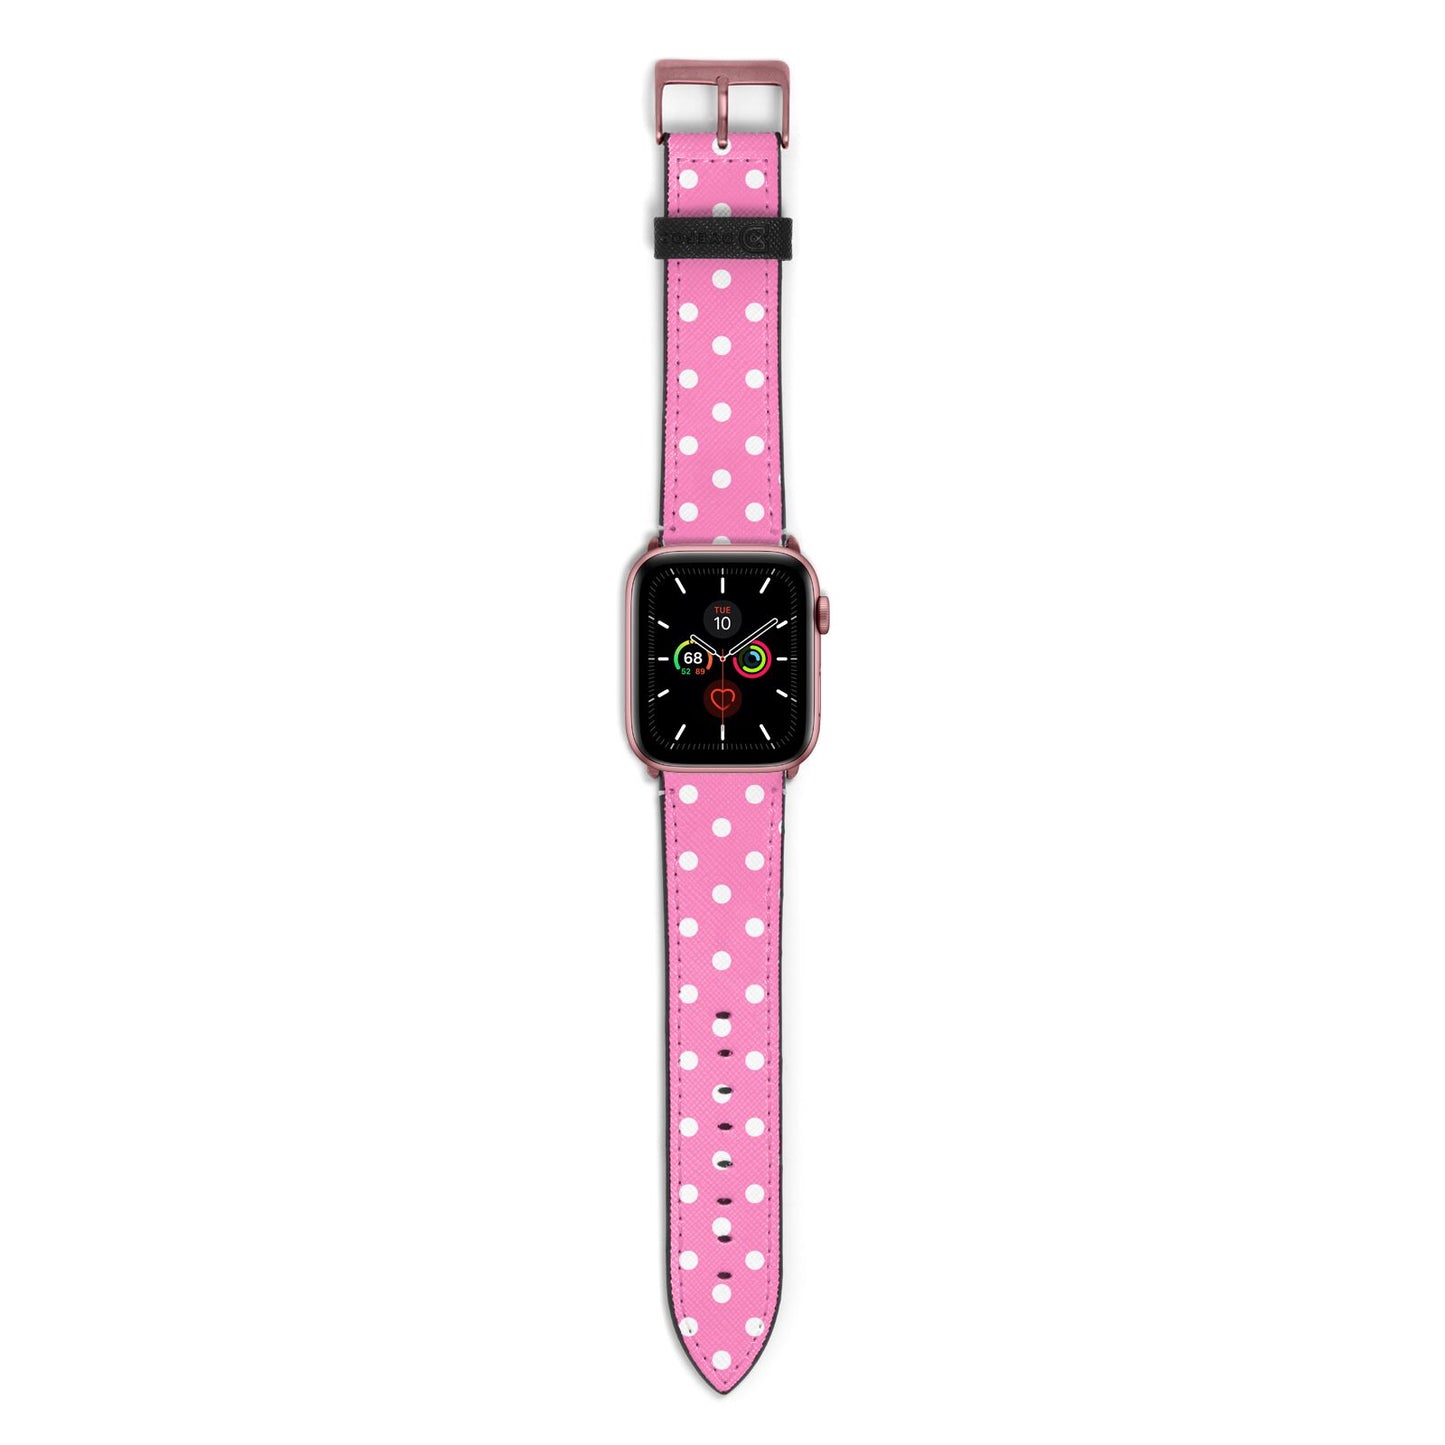 Pink Polka Dot Apple Watch Strap with Rose Gold Hardware